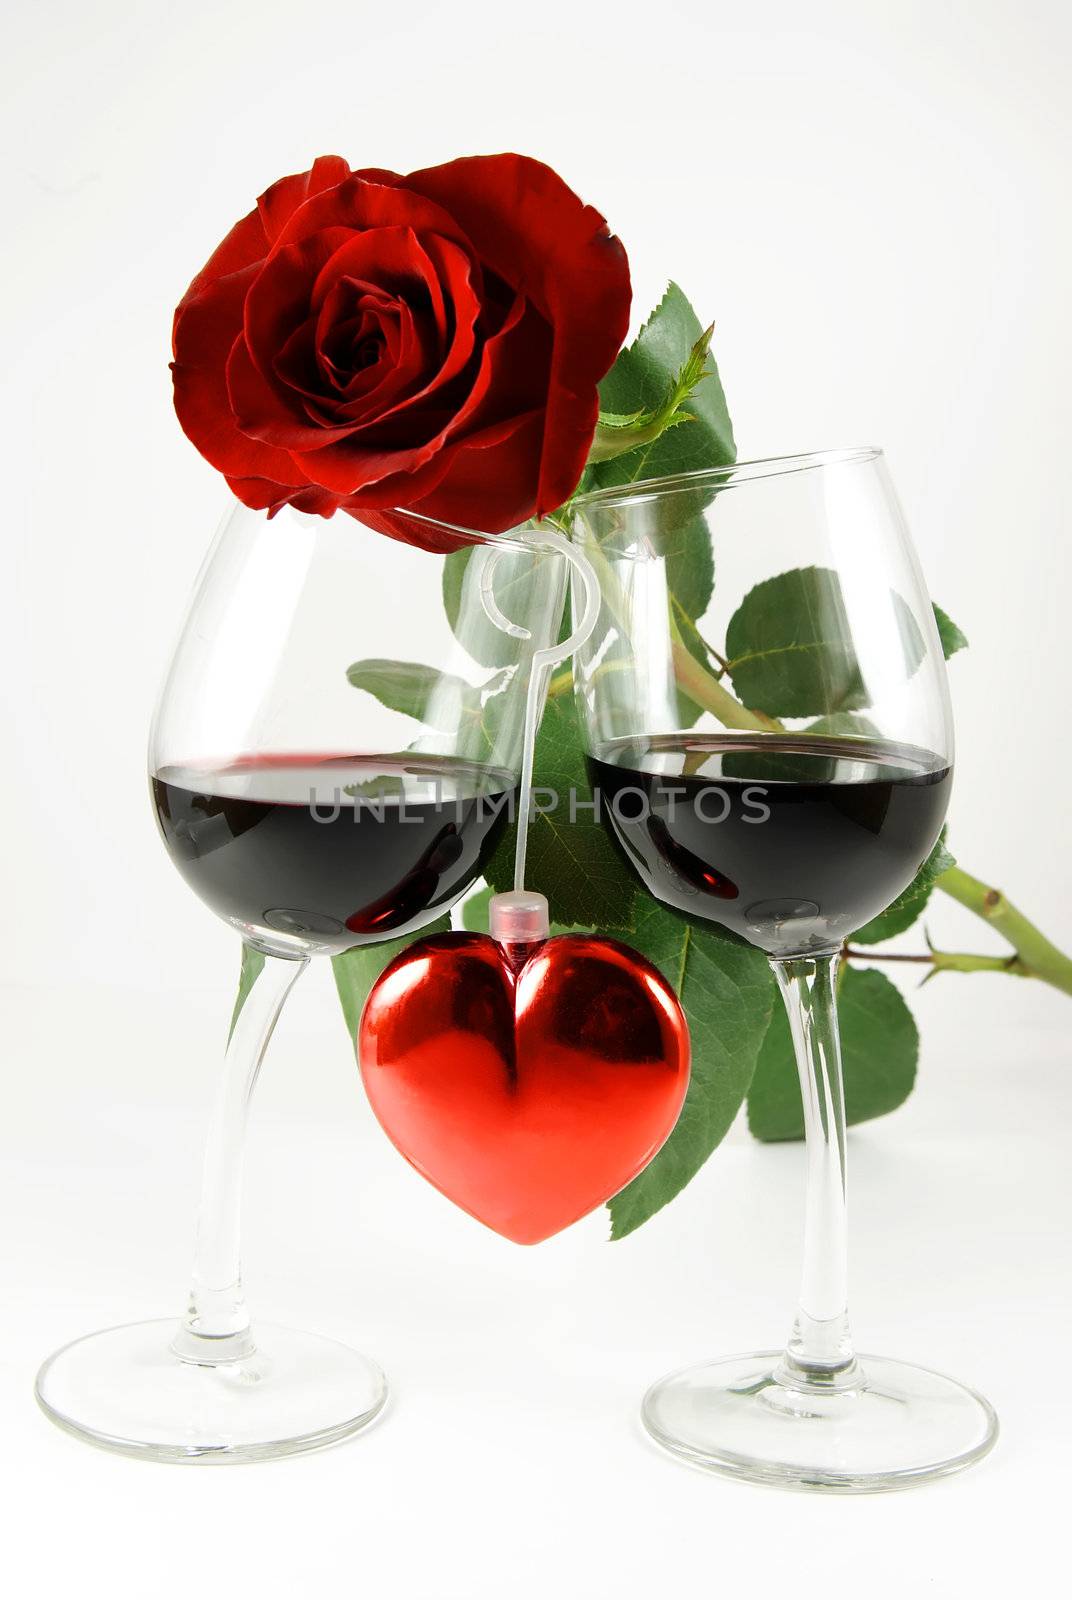 Rose on two glasses and heart by serpl